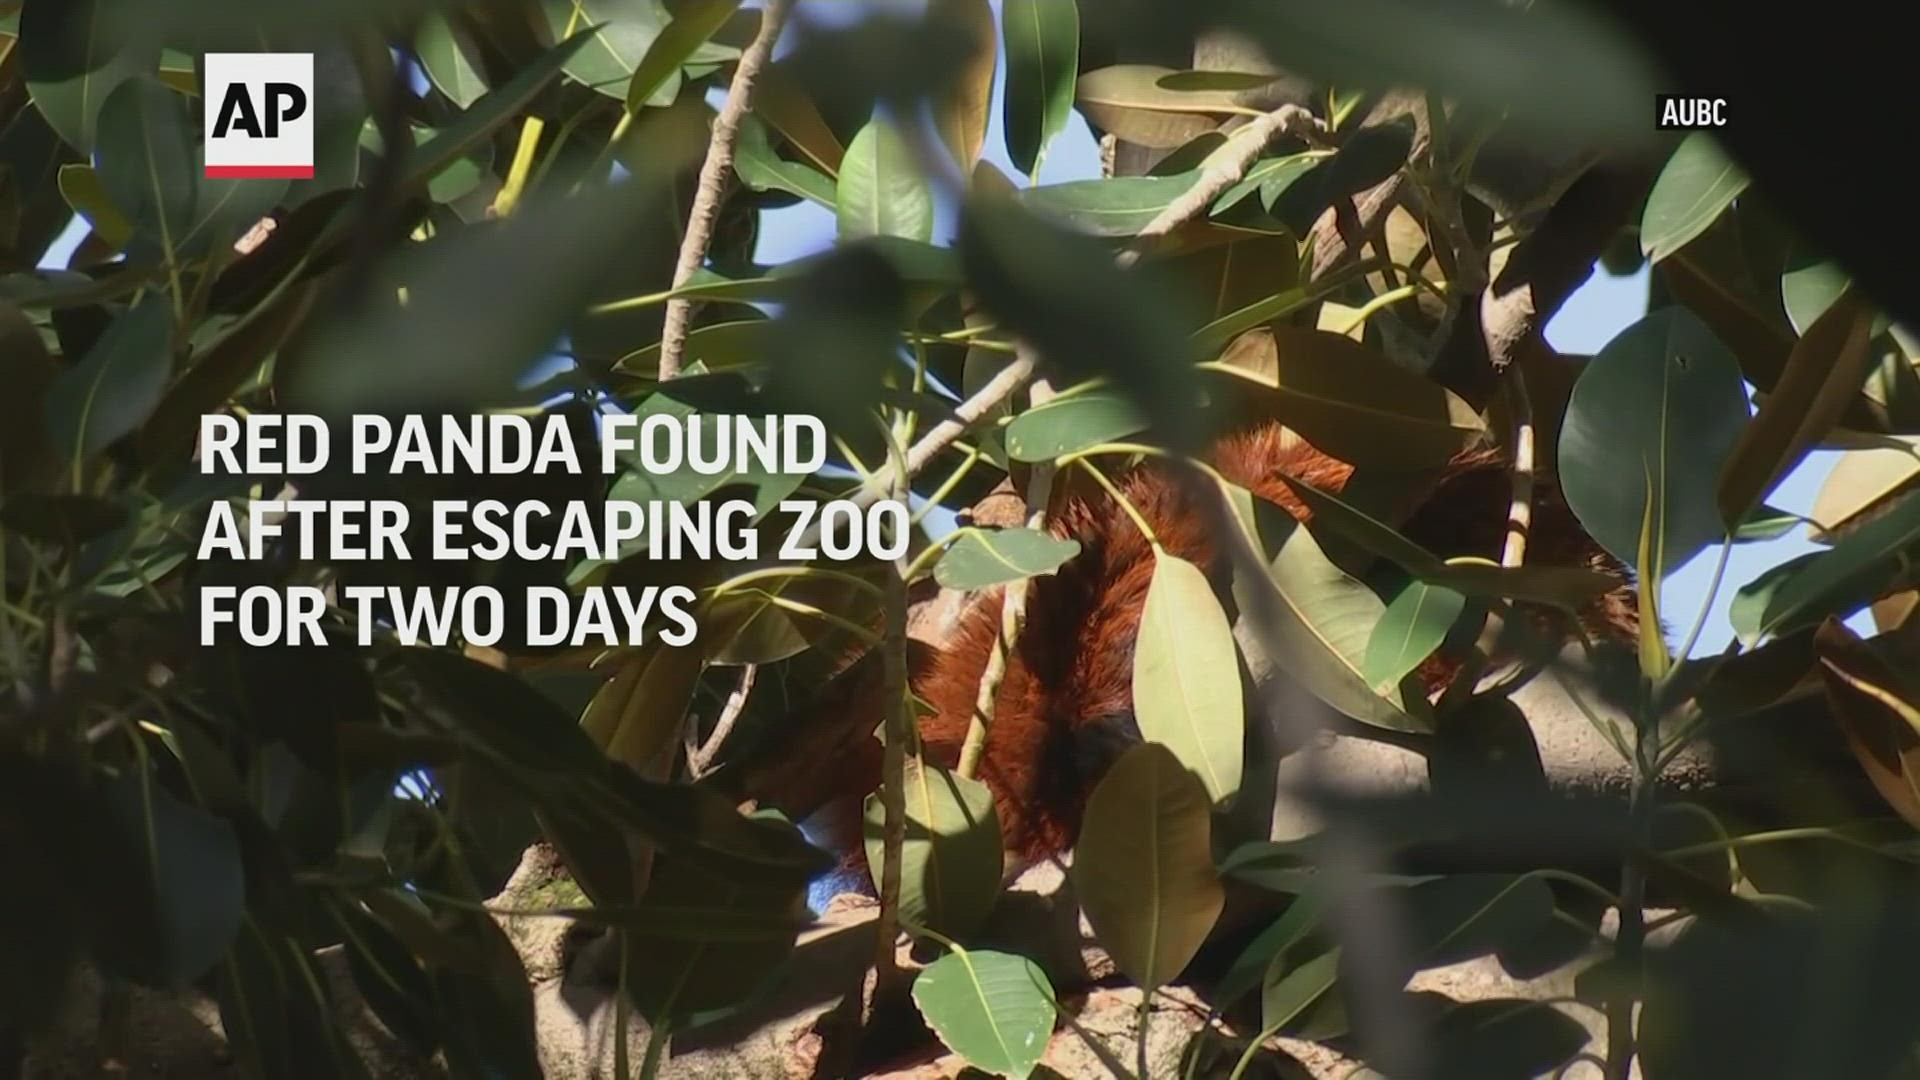 Ravi was caught two days after his escape in a nearby park, hiding up a tree.